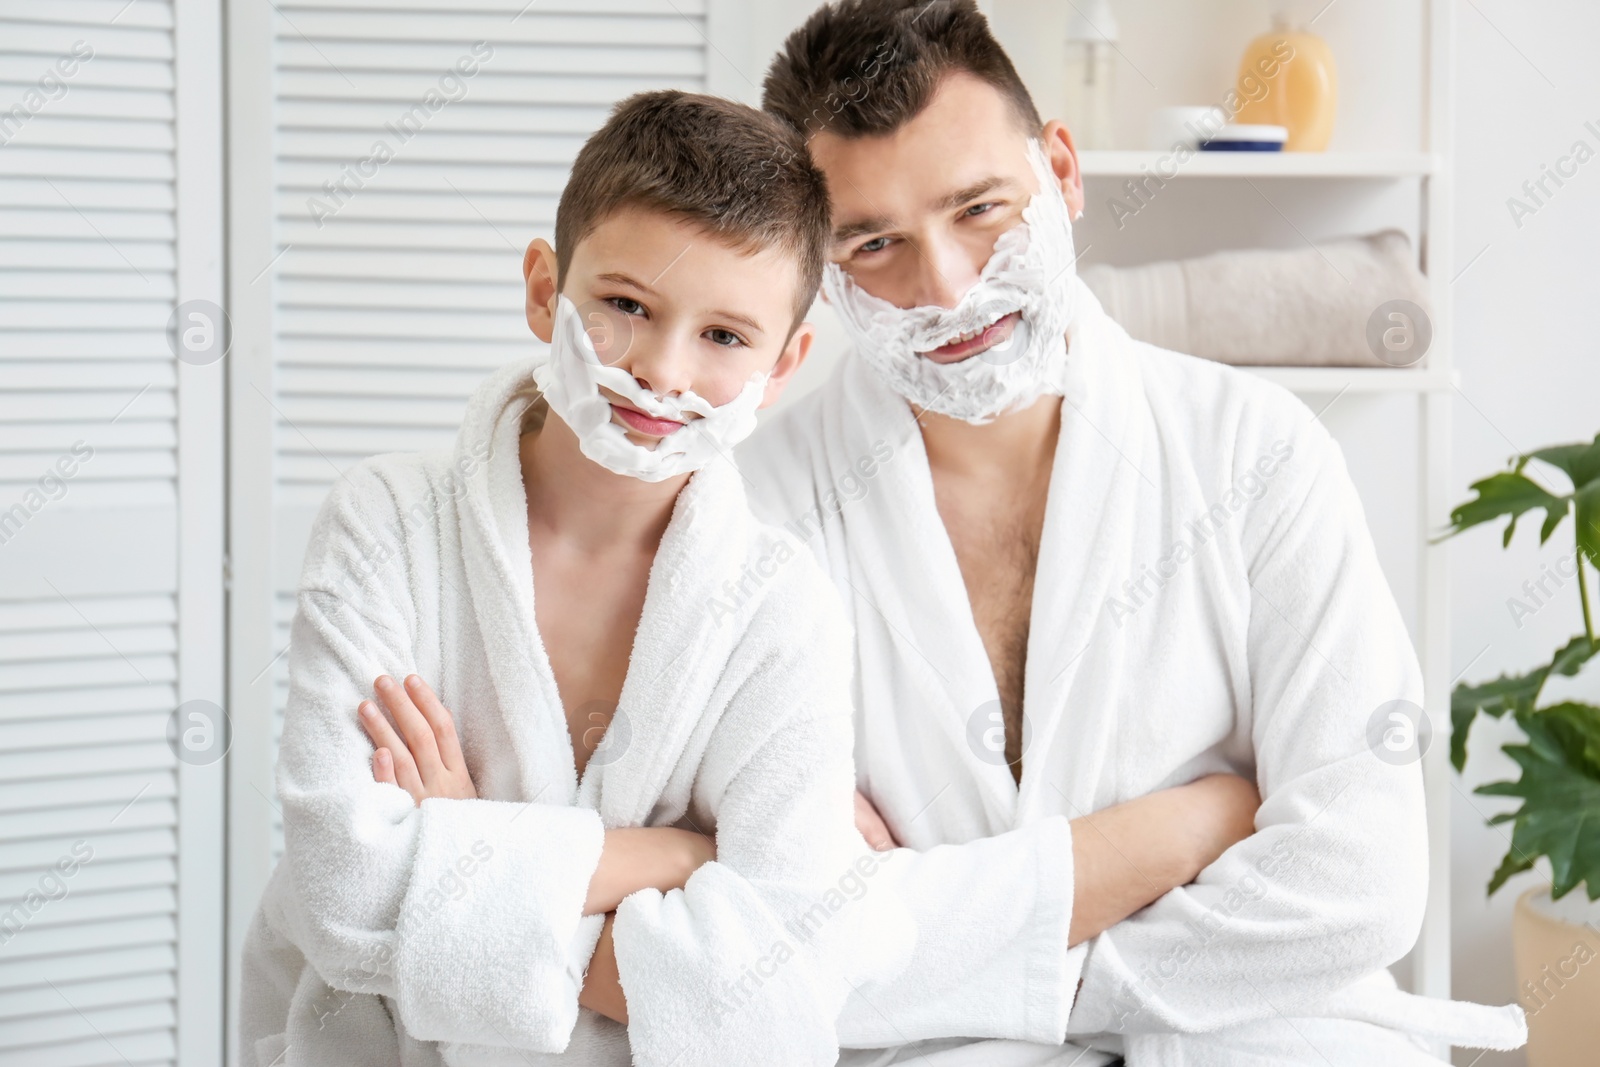 Photo of Dad teaching his son to shave in bathroom